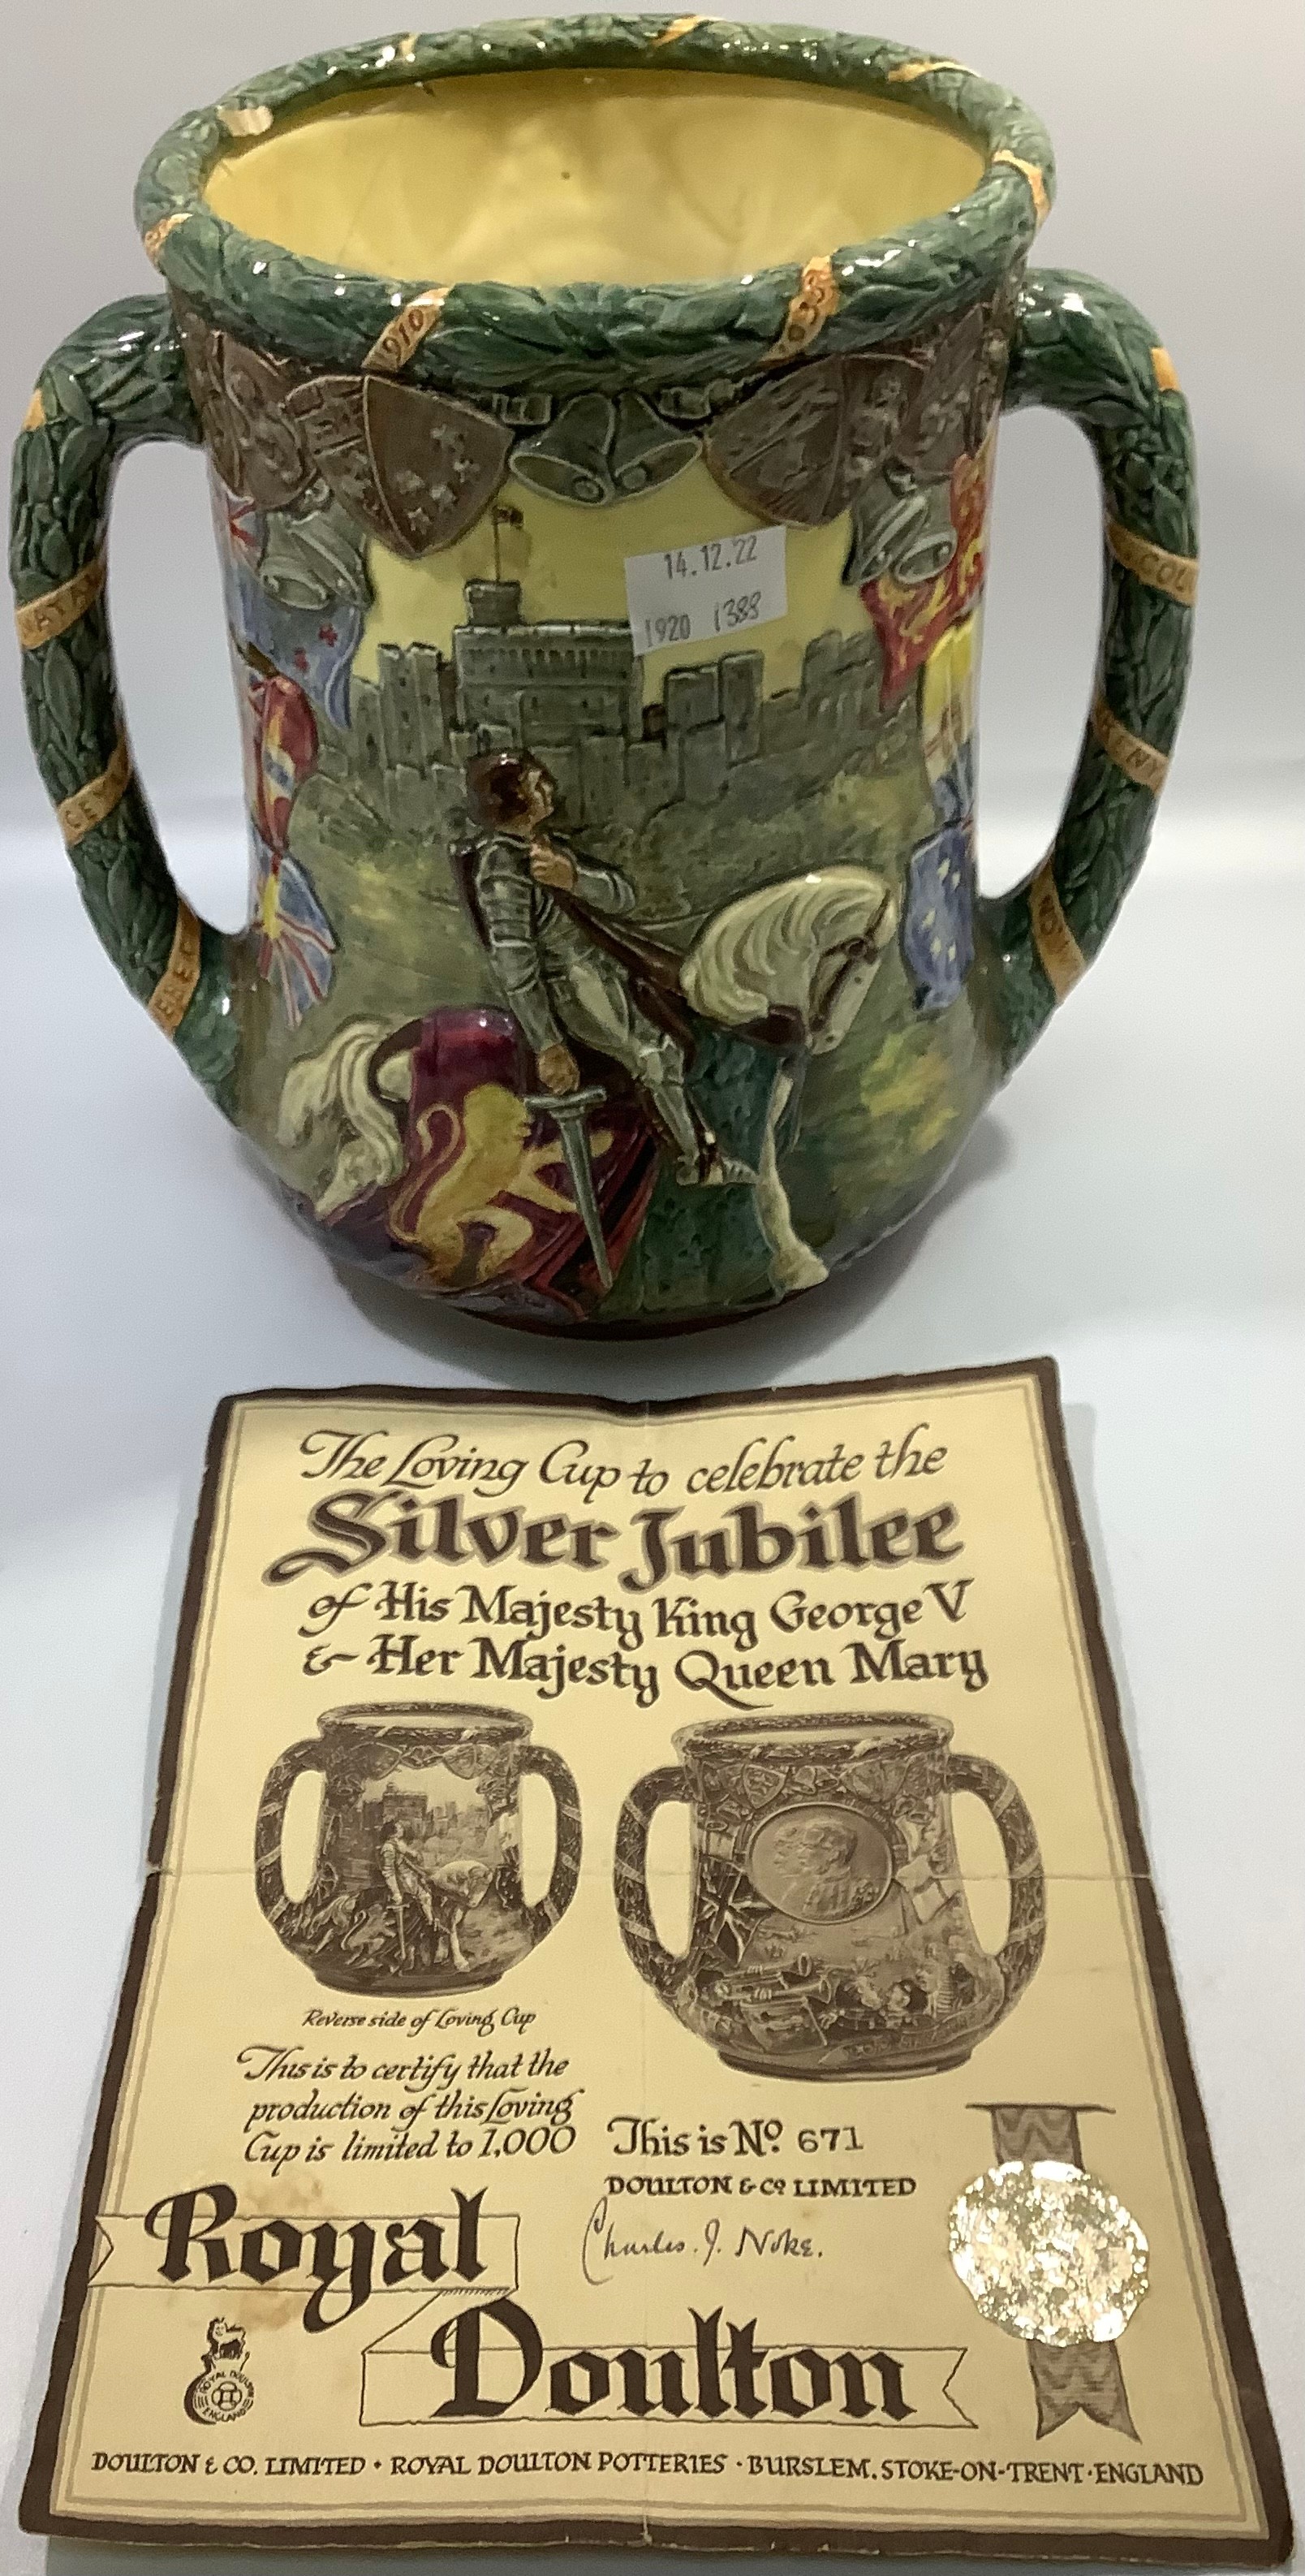 A Royal Doulton twin-handled loving cup to celebrate the Silver Jubilee of His Majesty King George V